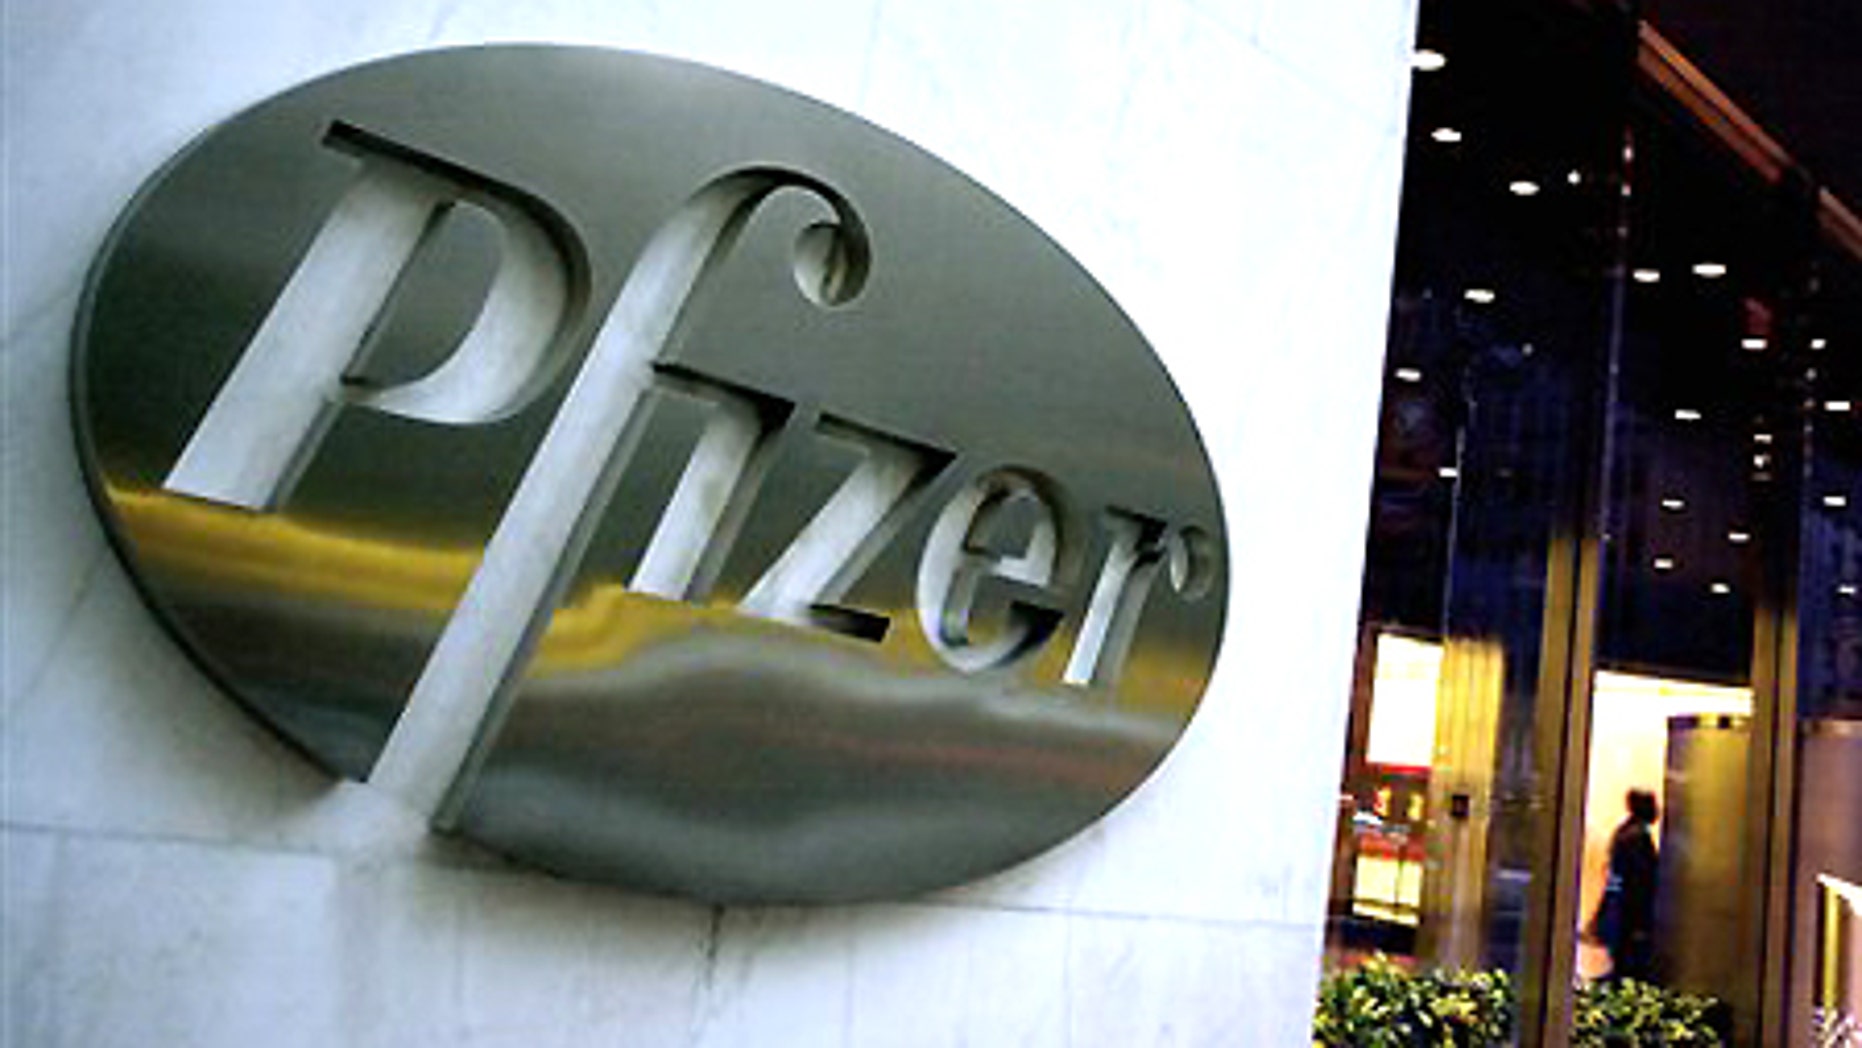 Pfizer facing surge of lawsuits over Lipitor Fox News